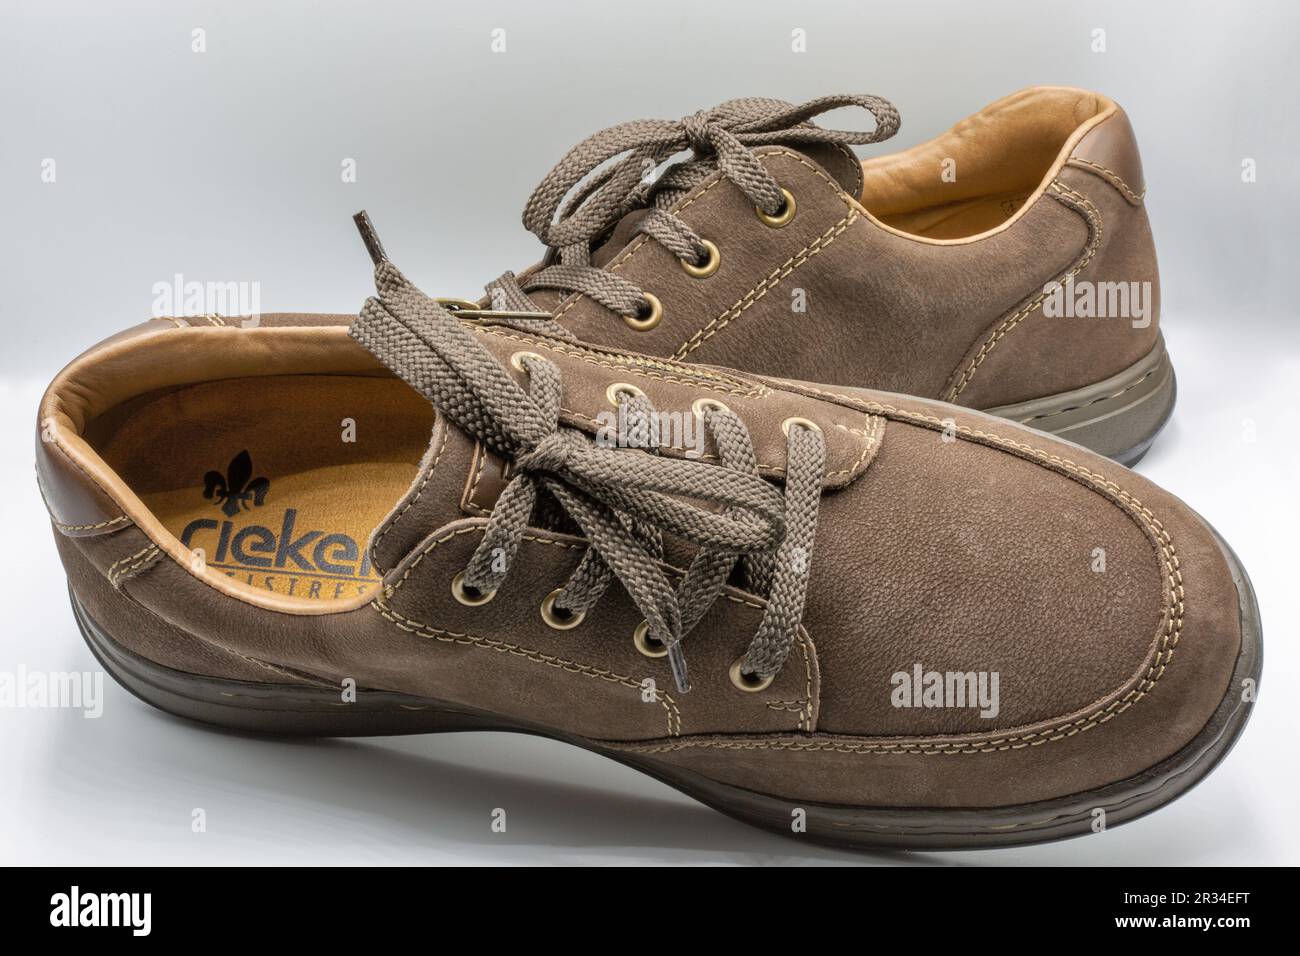 Rieker shoes stock photography and images Alamy